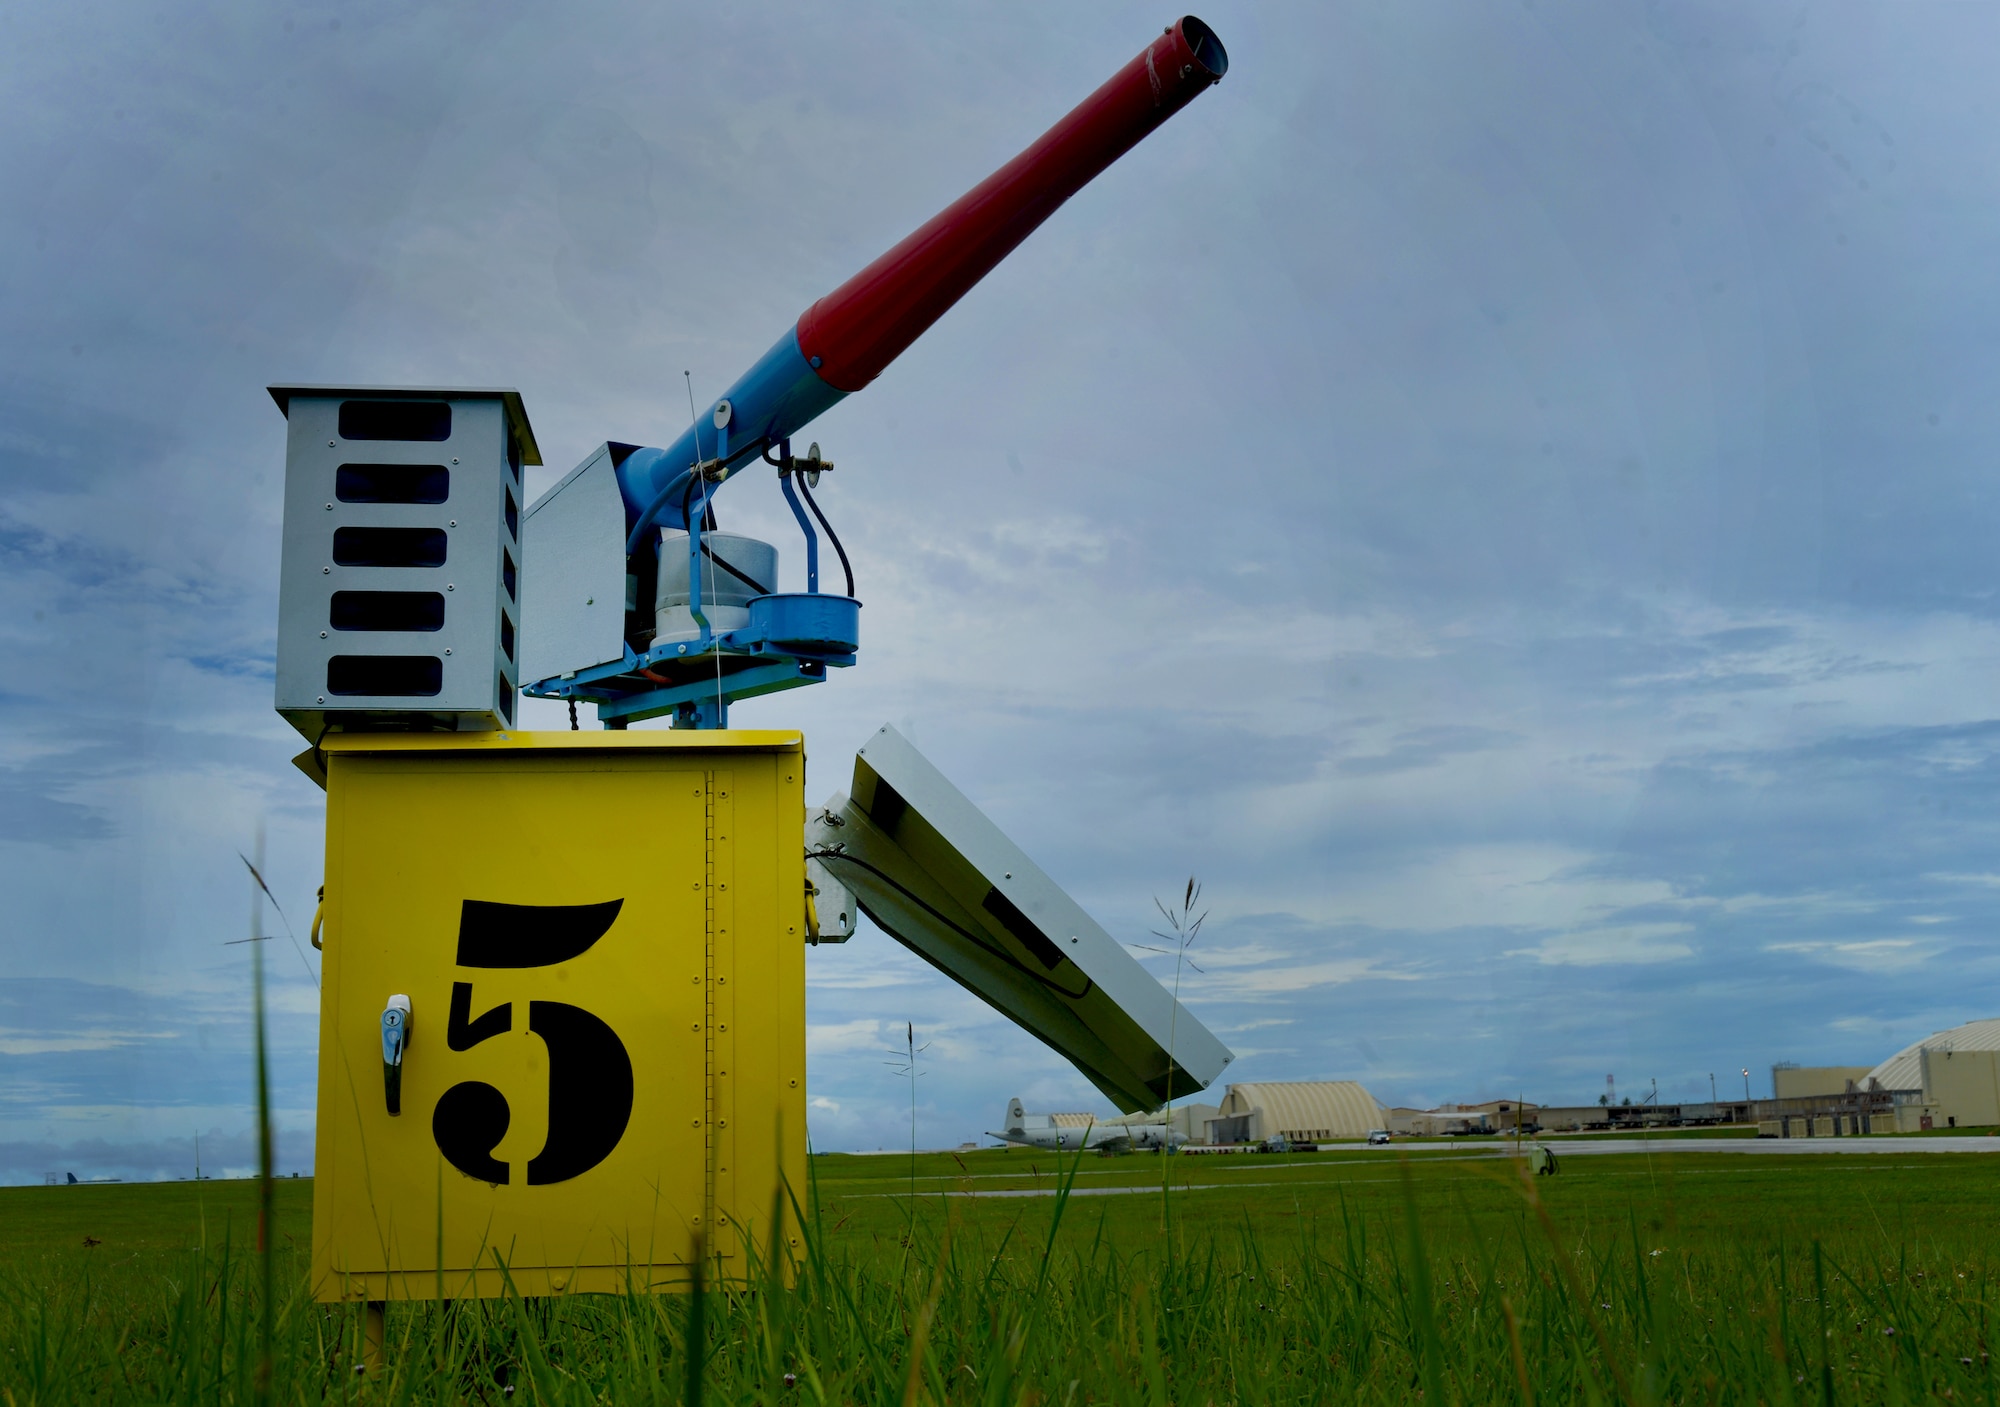 A sound-producing cannon waits to be activated just off the main taxiway here Aug. 18. The system of 30 non-lethal, sound-producing cannons is designed to scare birds away from Andersen’s runways in an effort to minimize loss of Air Force resources and personnel from hazardous wildlife populations on Andersen’s runway. (U.S. Air Force photo by Senior Airman Benjamin Wiseman/Released)